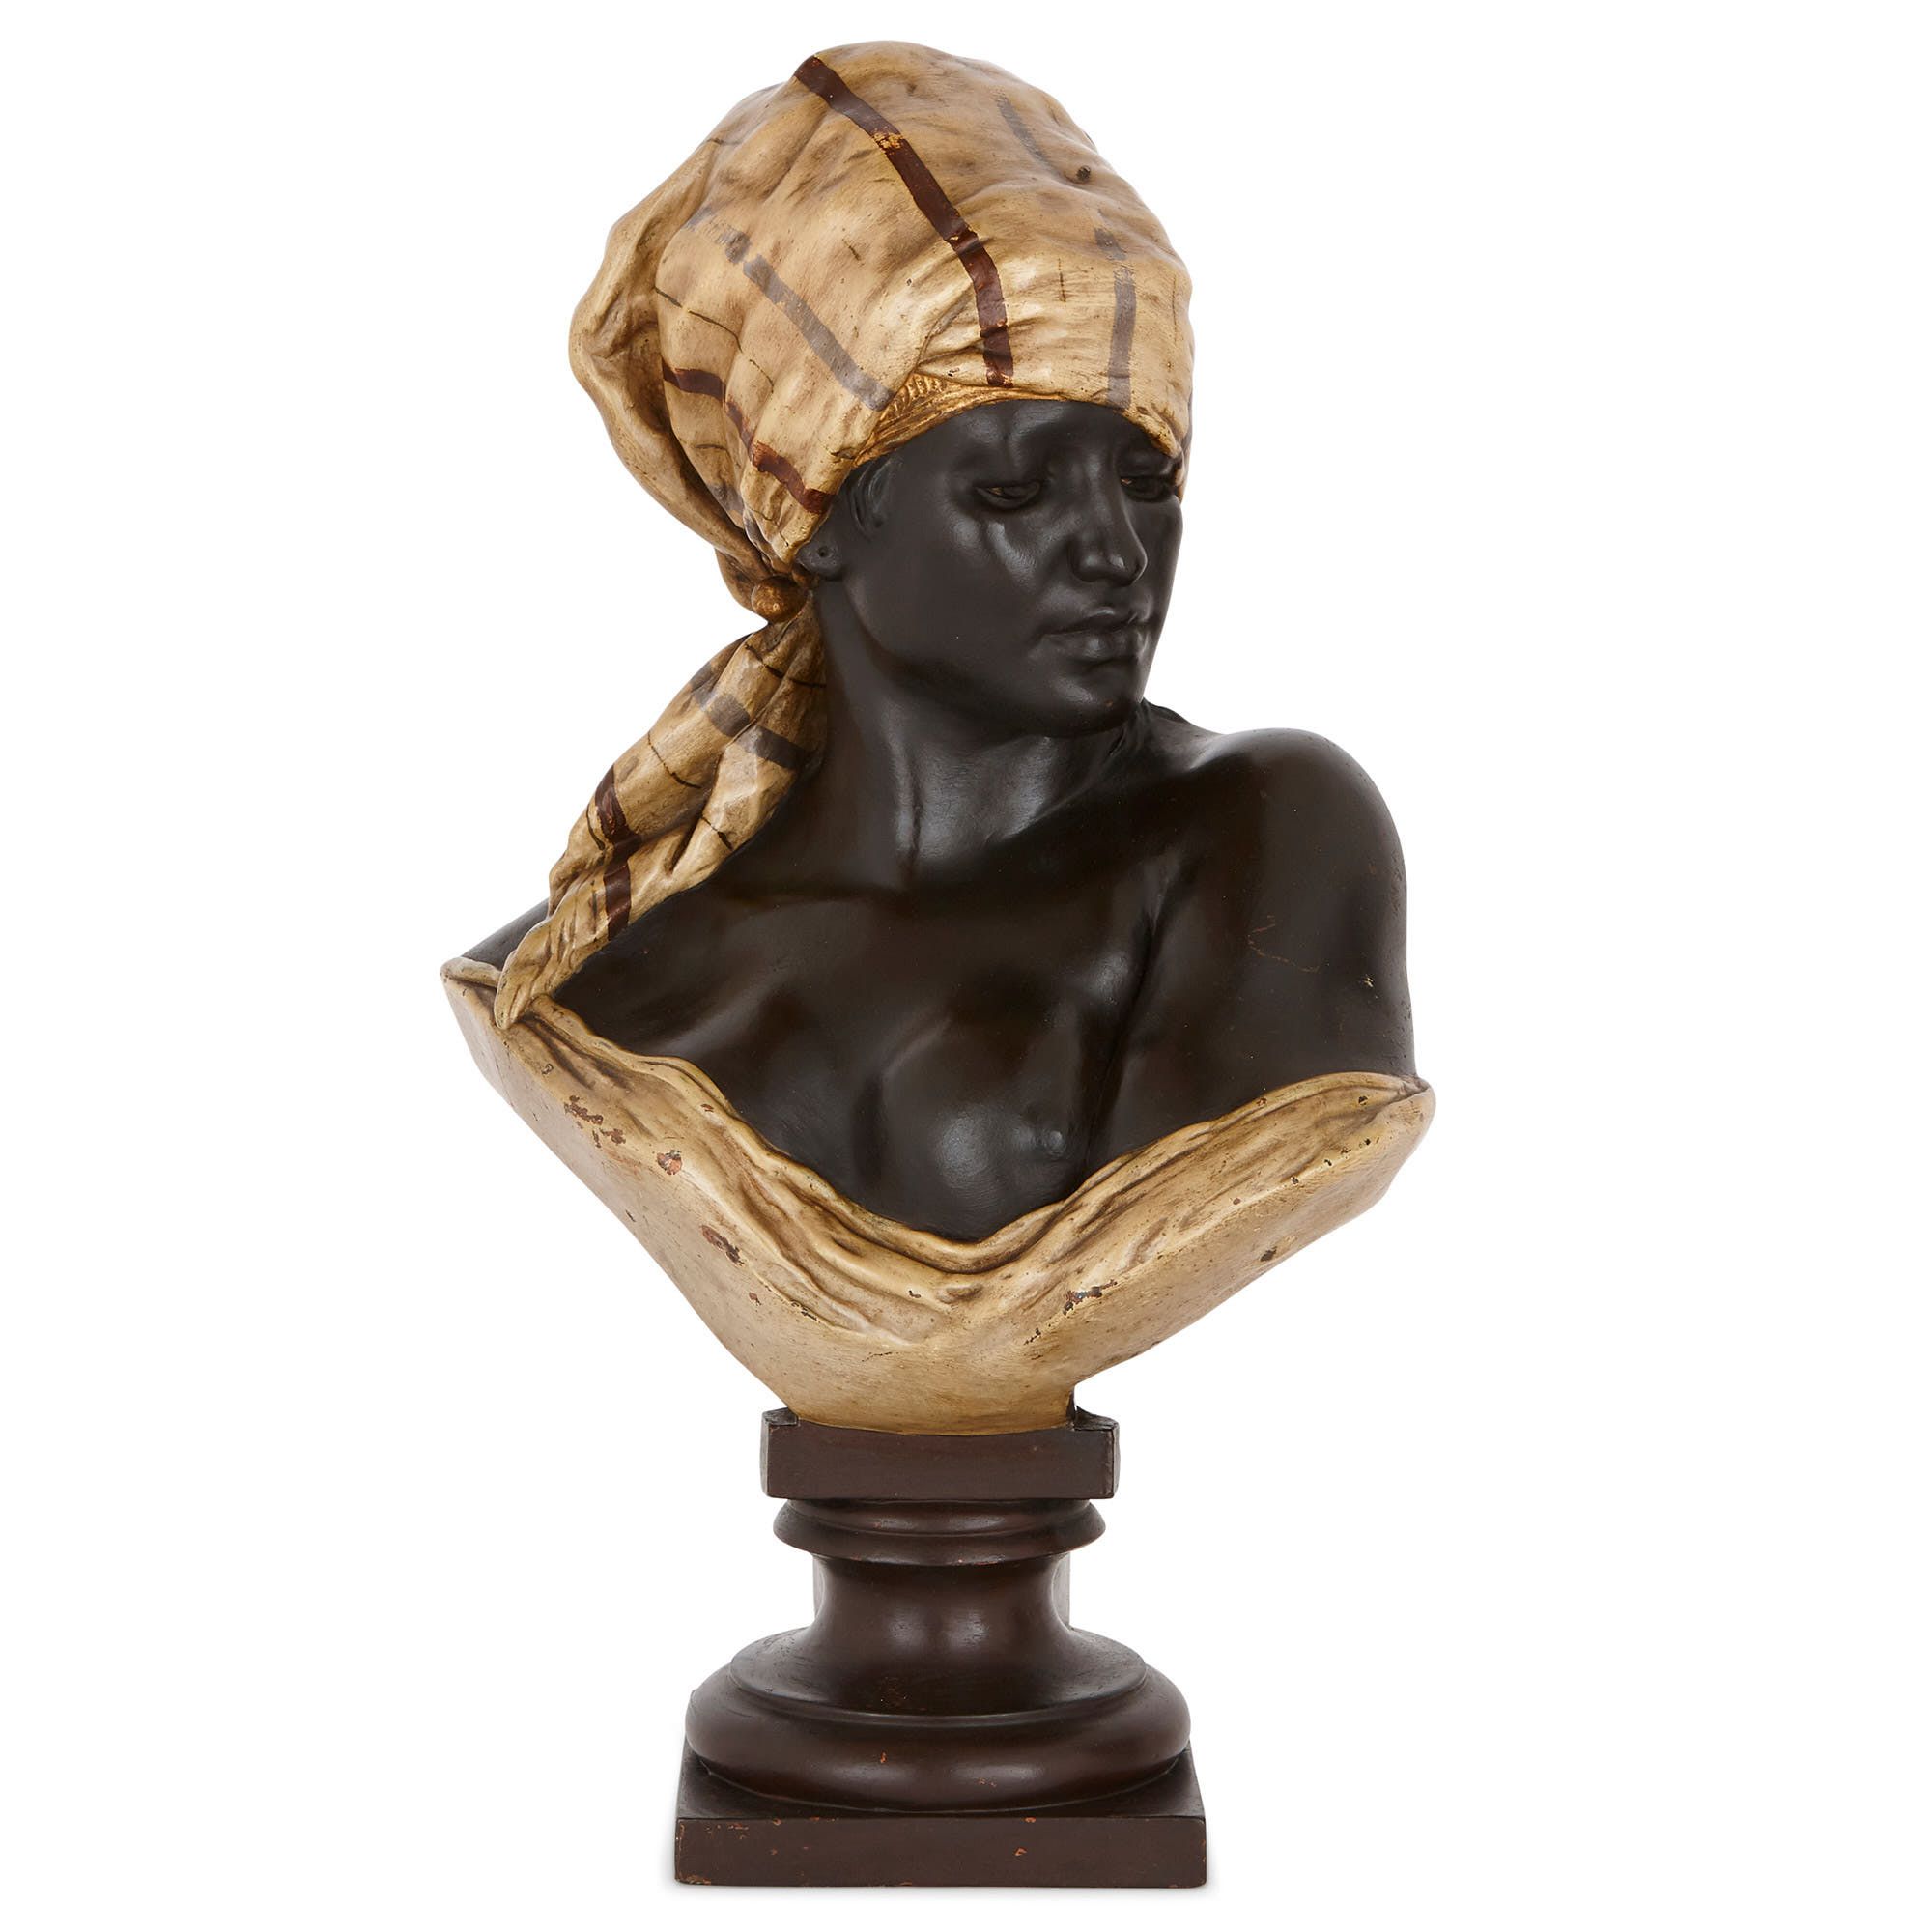 Pair of Orientalist terracotta busts by Thiele | Mayfair Gallery